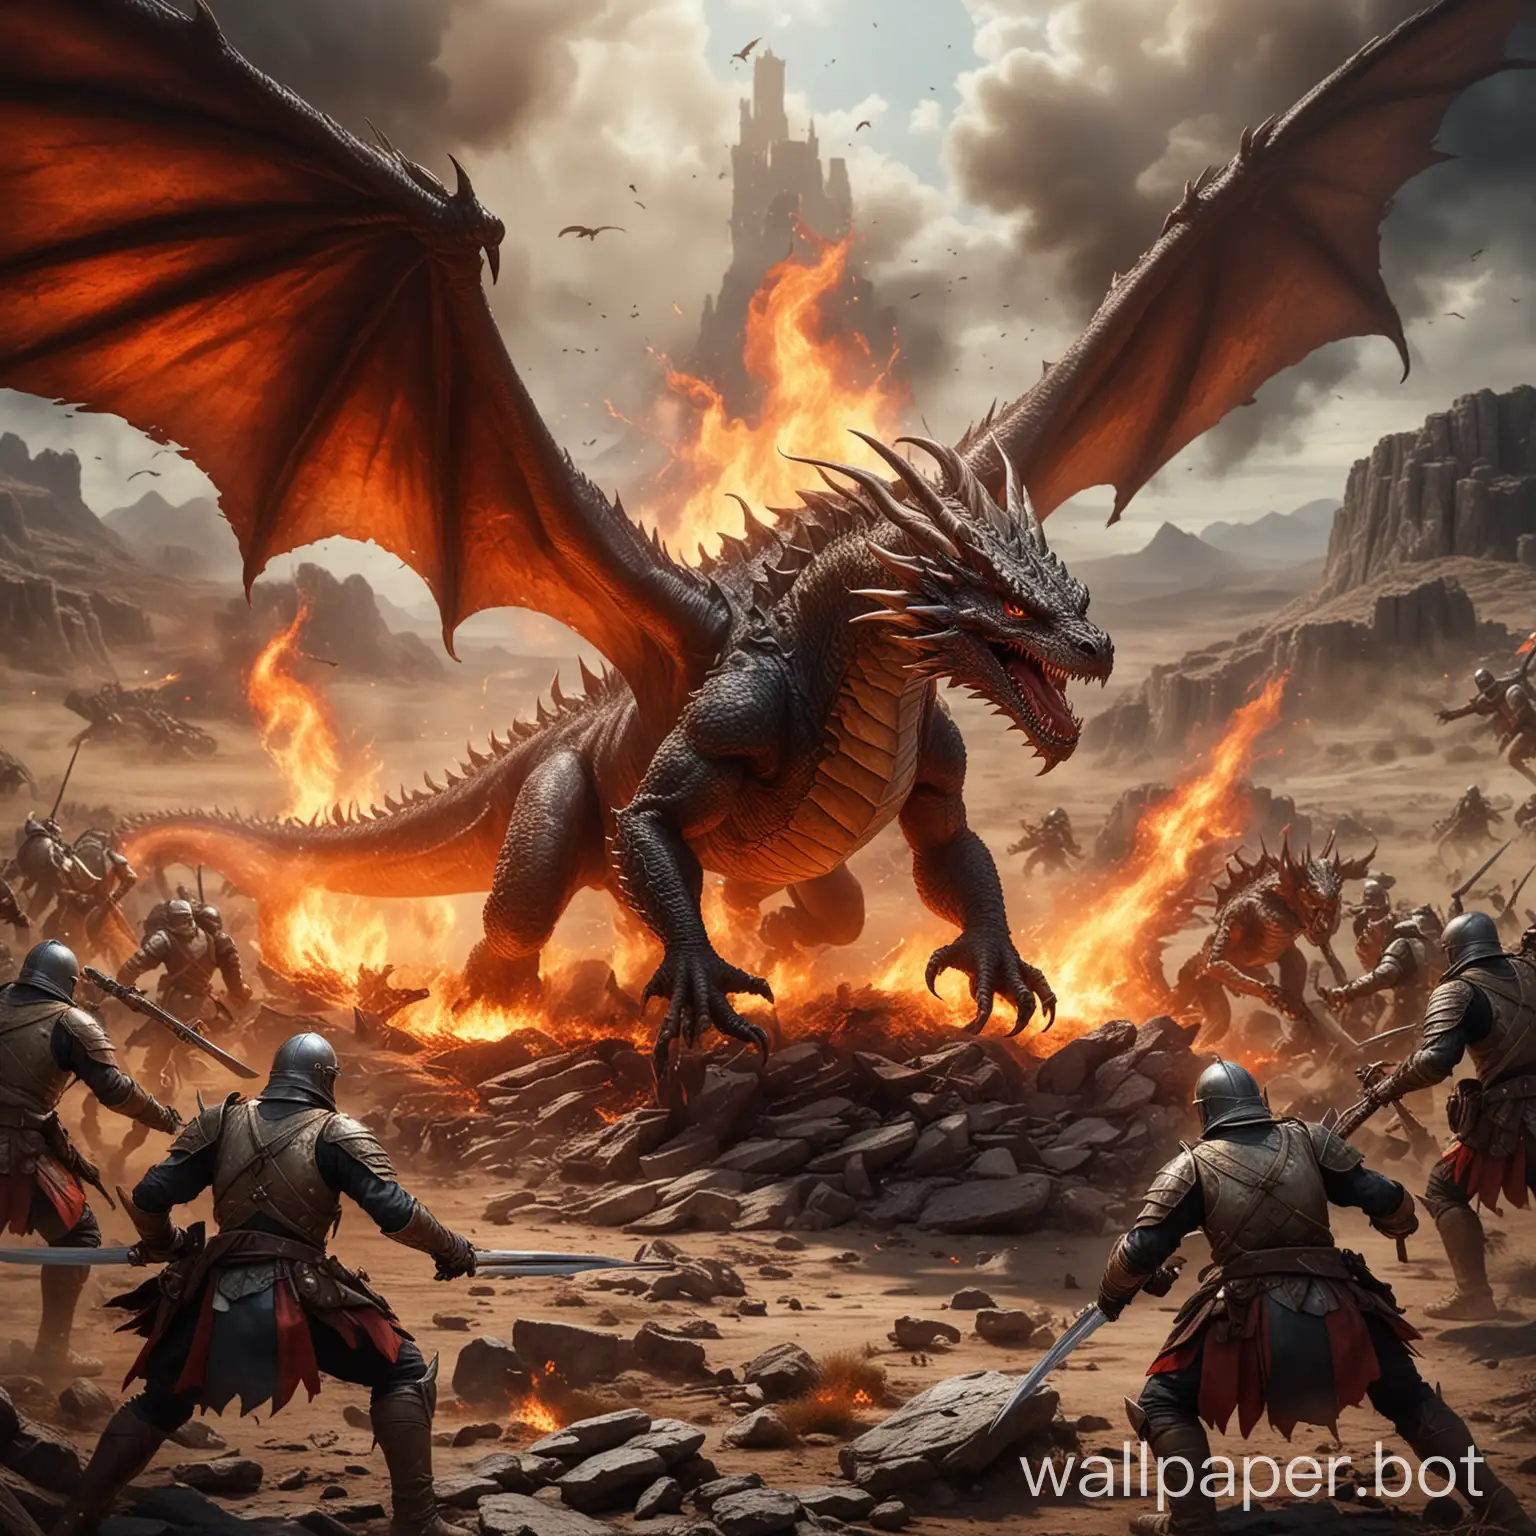 A battlefield with a western dragon fighting soldiers. The dragon is a fire dragon that is large in size with a stance showing off its strength standing on it back legs with wings out.